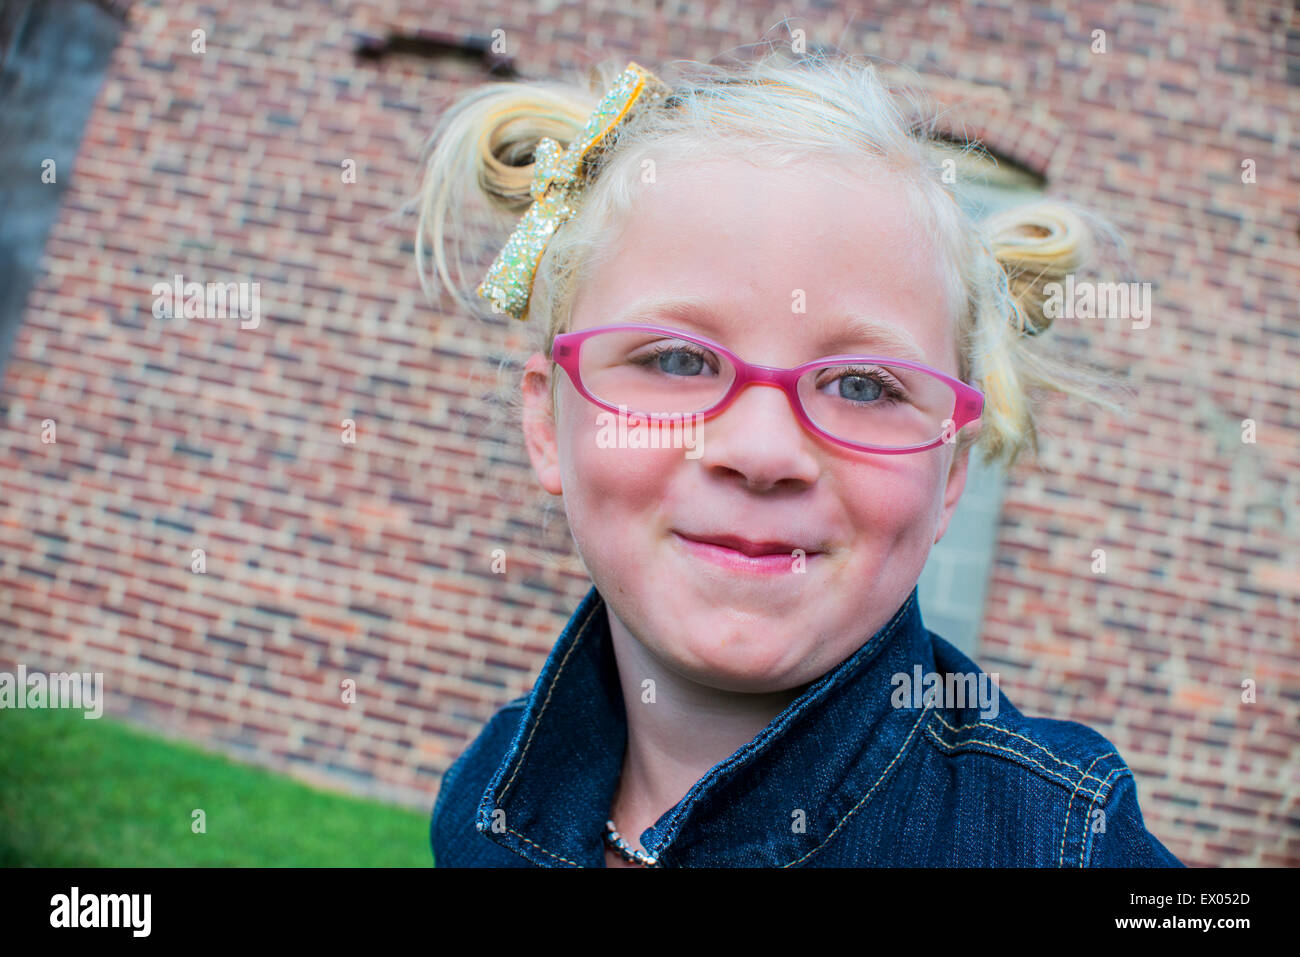 Portrait of young girl wearing pink glasses Stock Photo